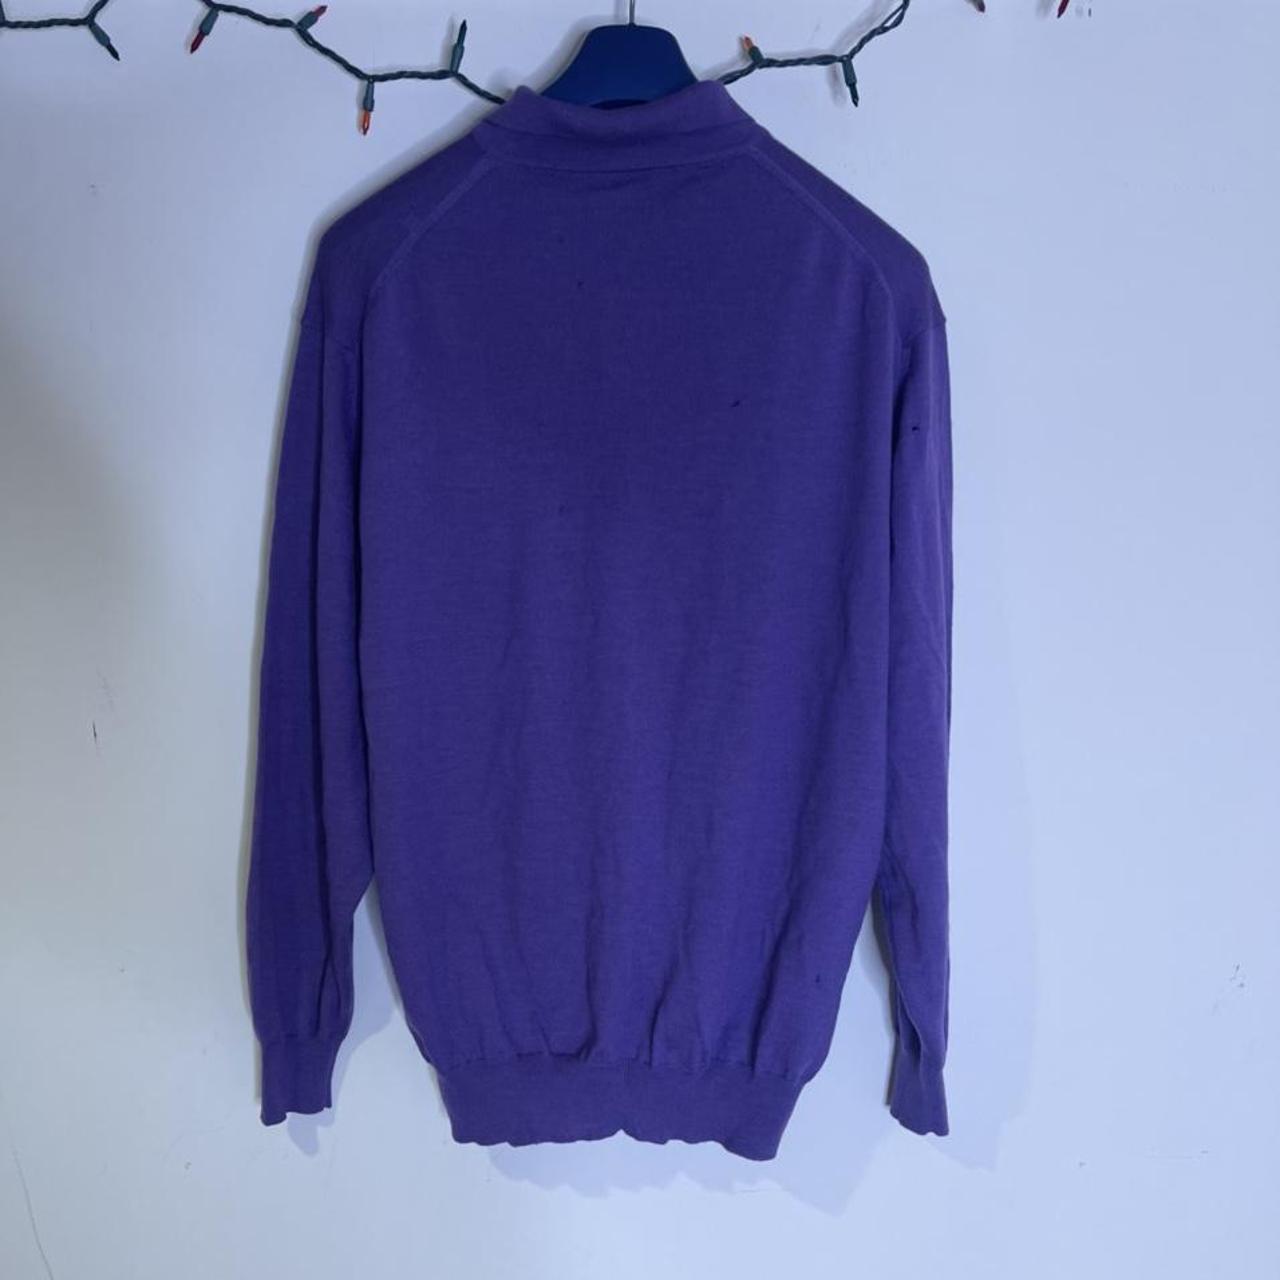 Product Image 3 - Brioni sweater , I’d guess